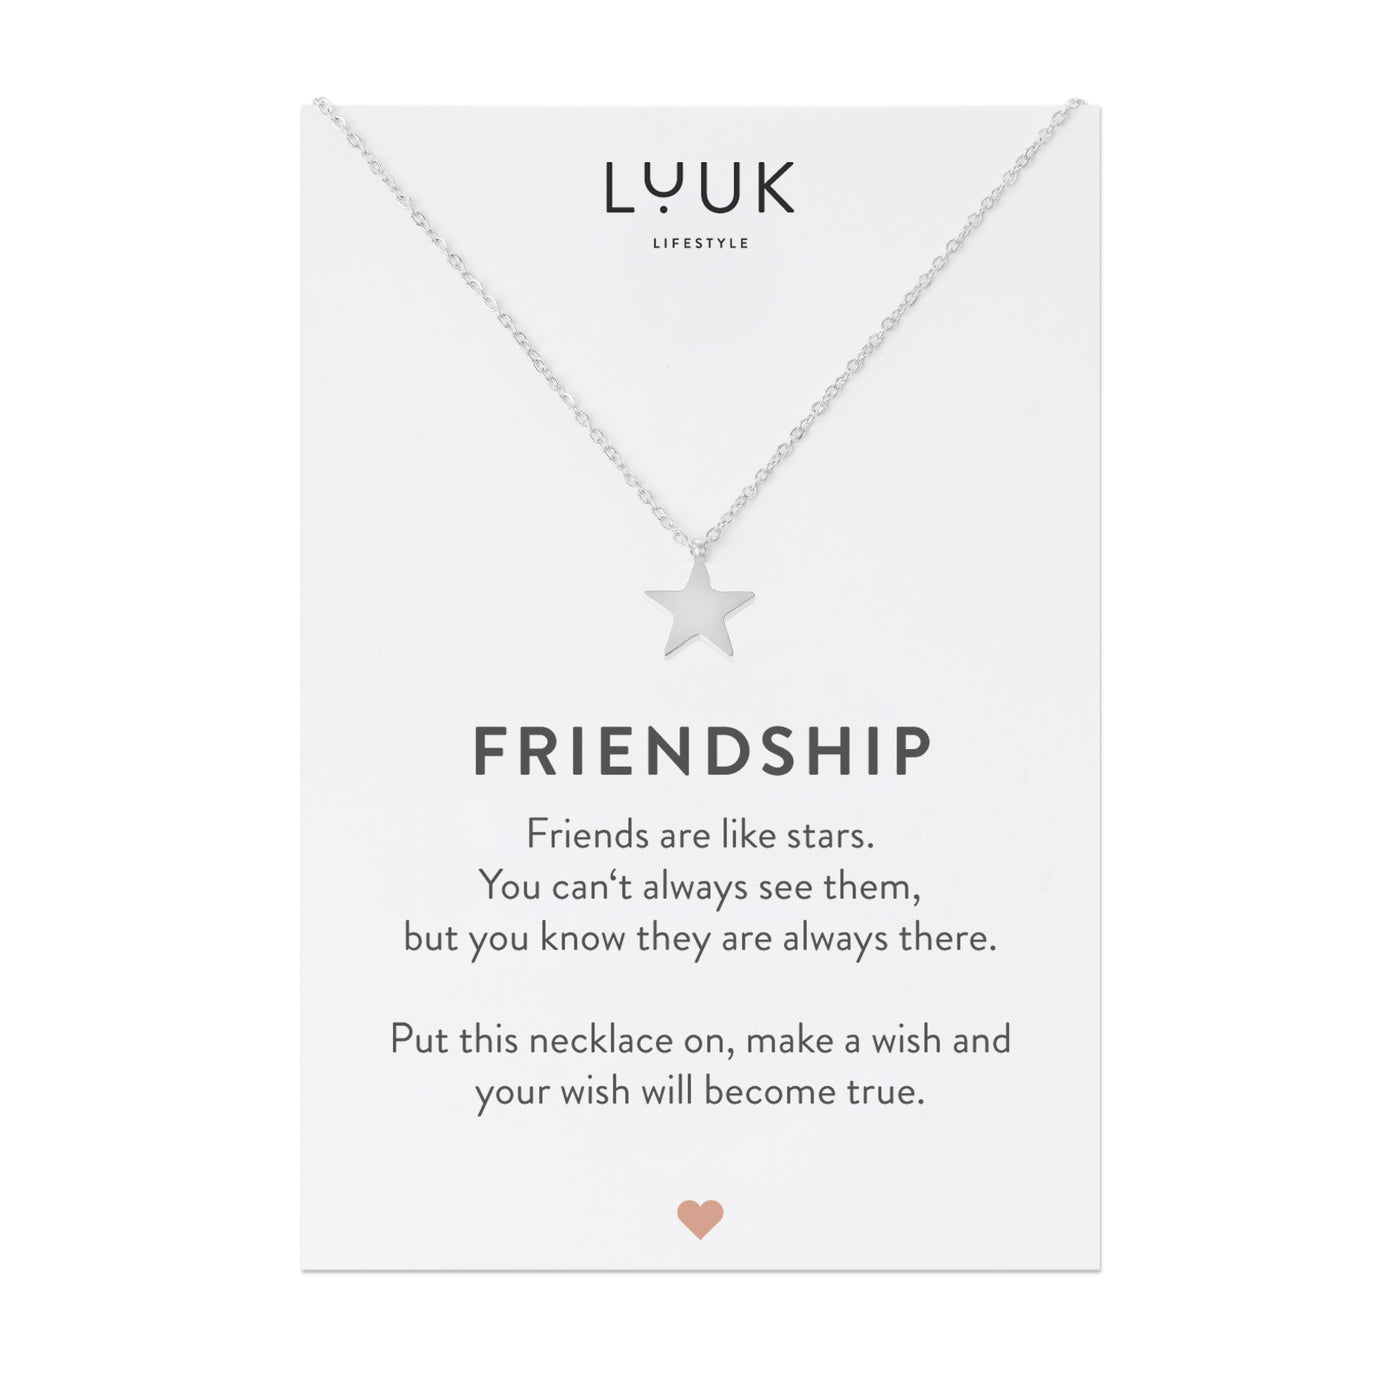 Necklace with star pendant and Friendship greeting card